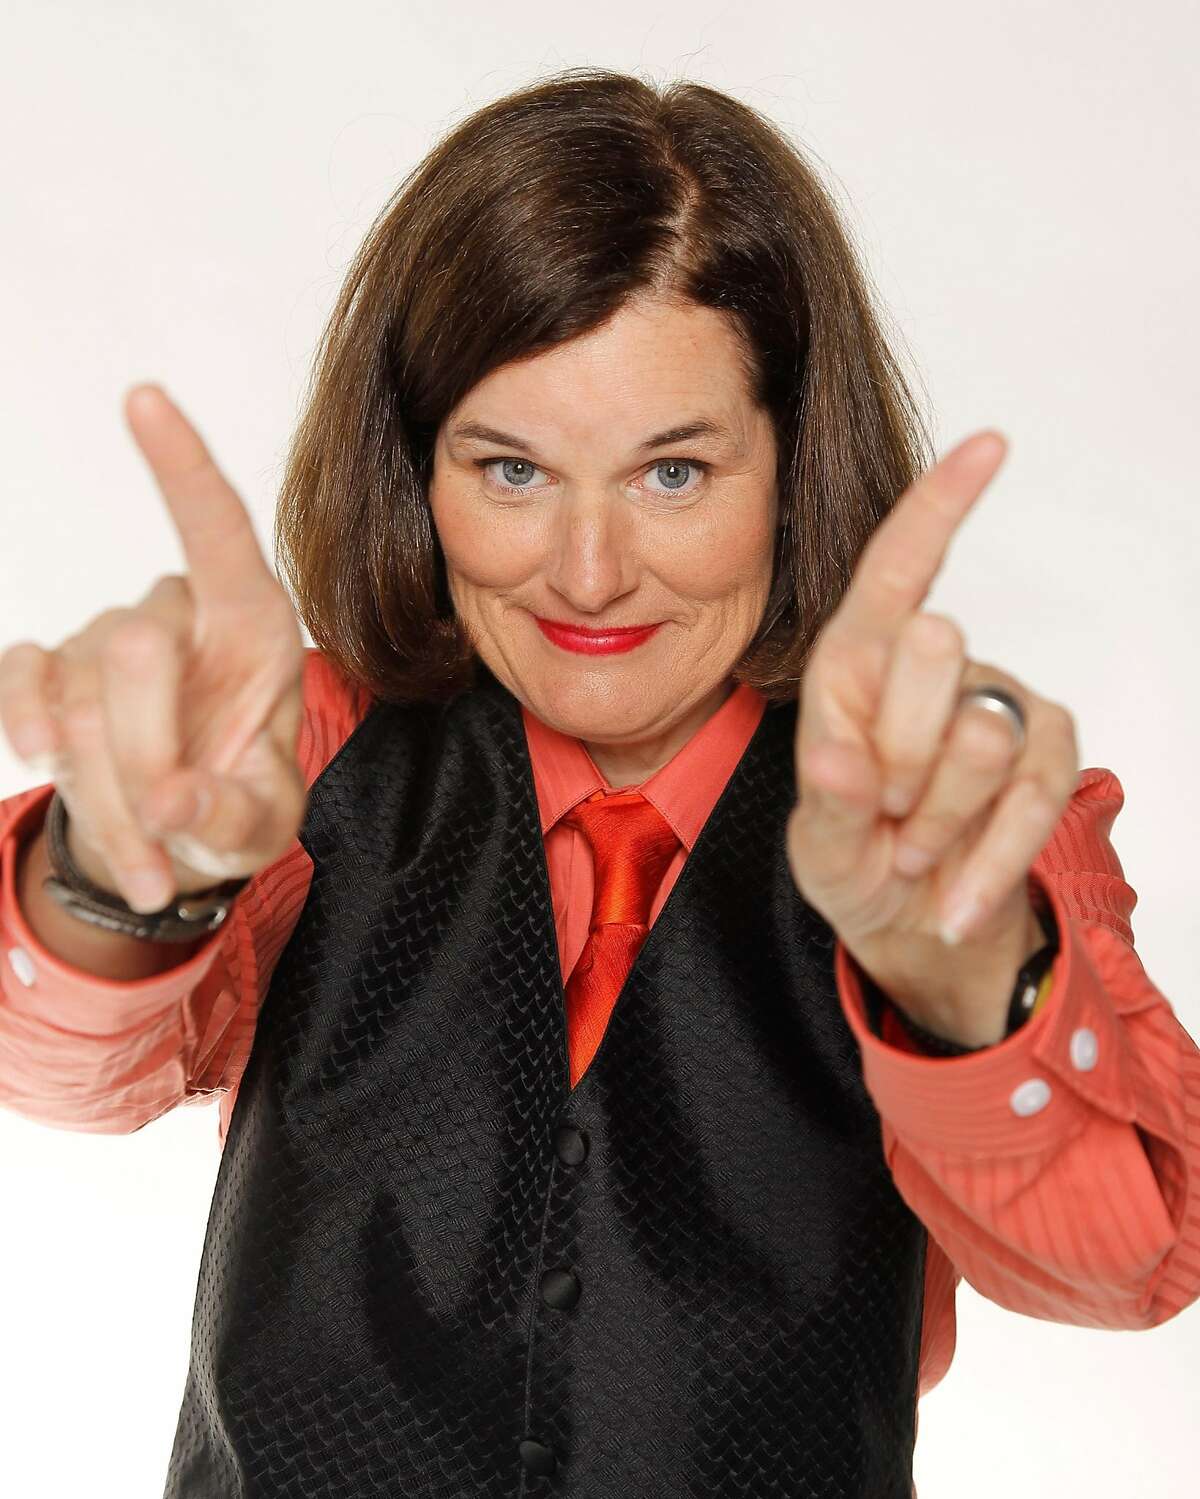 PASADENA, CA - JULY 12: Comedian Paula Poundstone poses during a portrait session at The Ice House Comedy Club on July 12, 2012 in Pasadena, California. (Photo by Michael Schwartz/WireImage) *** Local Caption *** Paula Poundstone